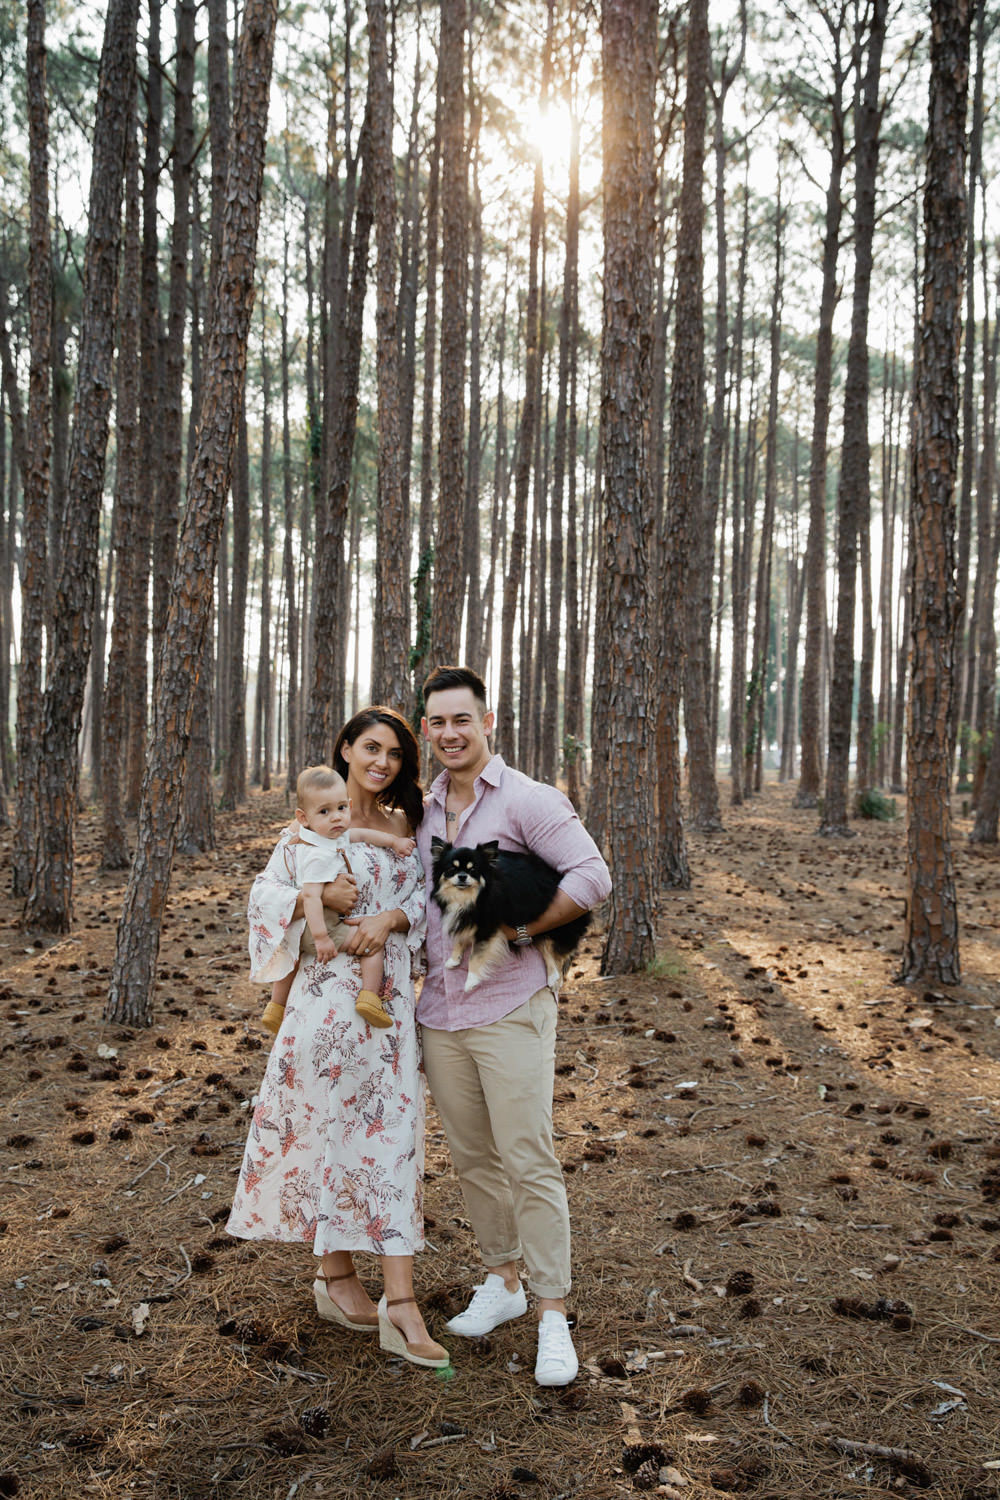 newborn-tofirst-year-Natural-family with maternity-newborn-lifestyle-imagery- photography in Brisbane- QuinceandMulberry